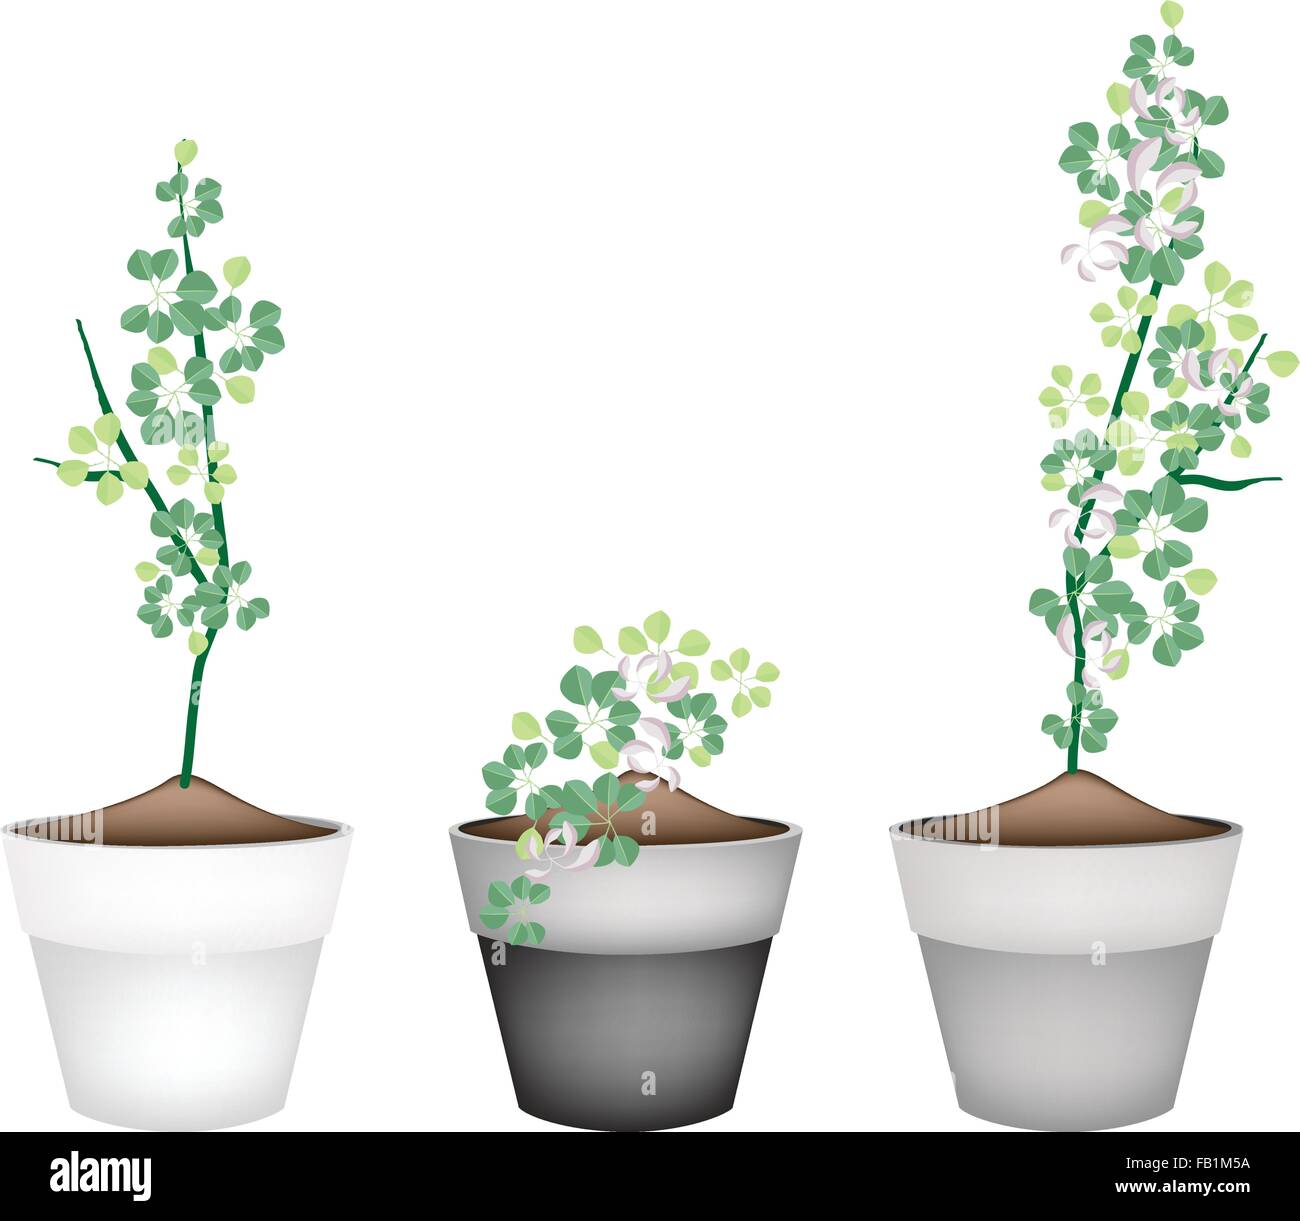 Ecological Concept, Green Manila Tamarind or Pithecellobium Dulce Benth Tree with Green Leaves in Ceramic Flower Pots for Garden Stock Vector